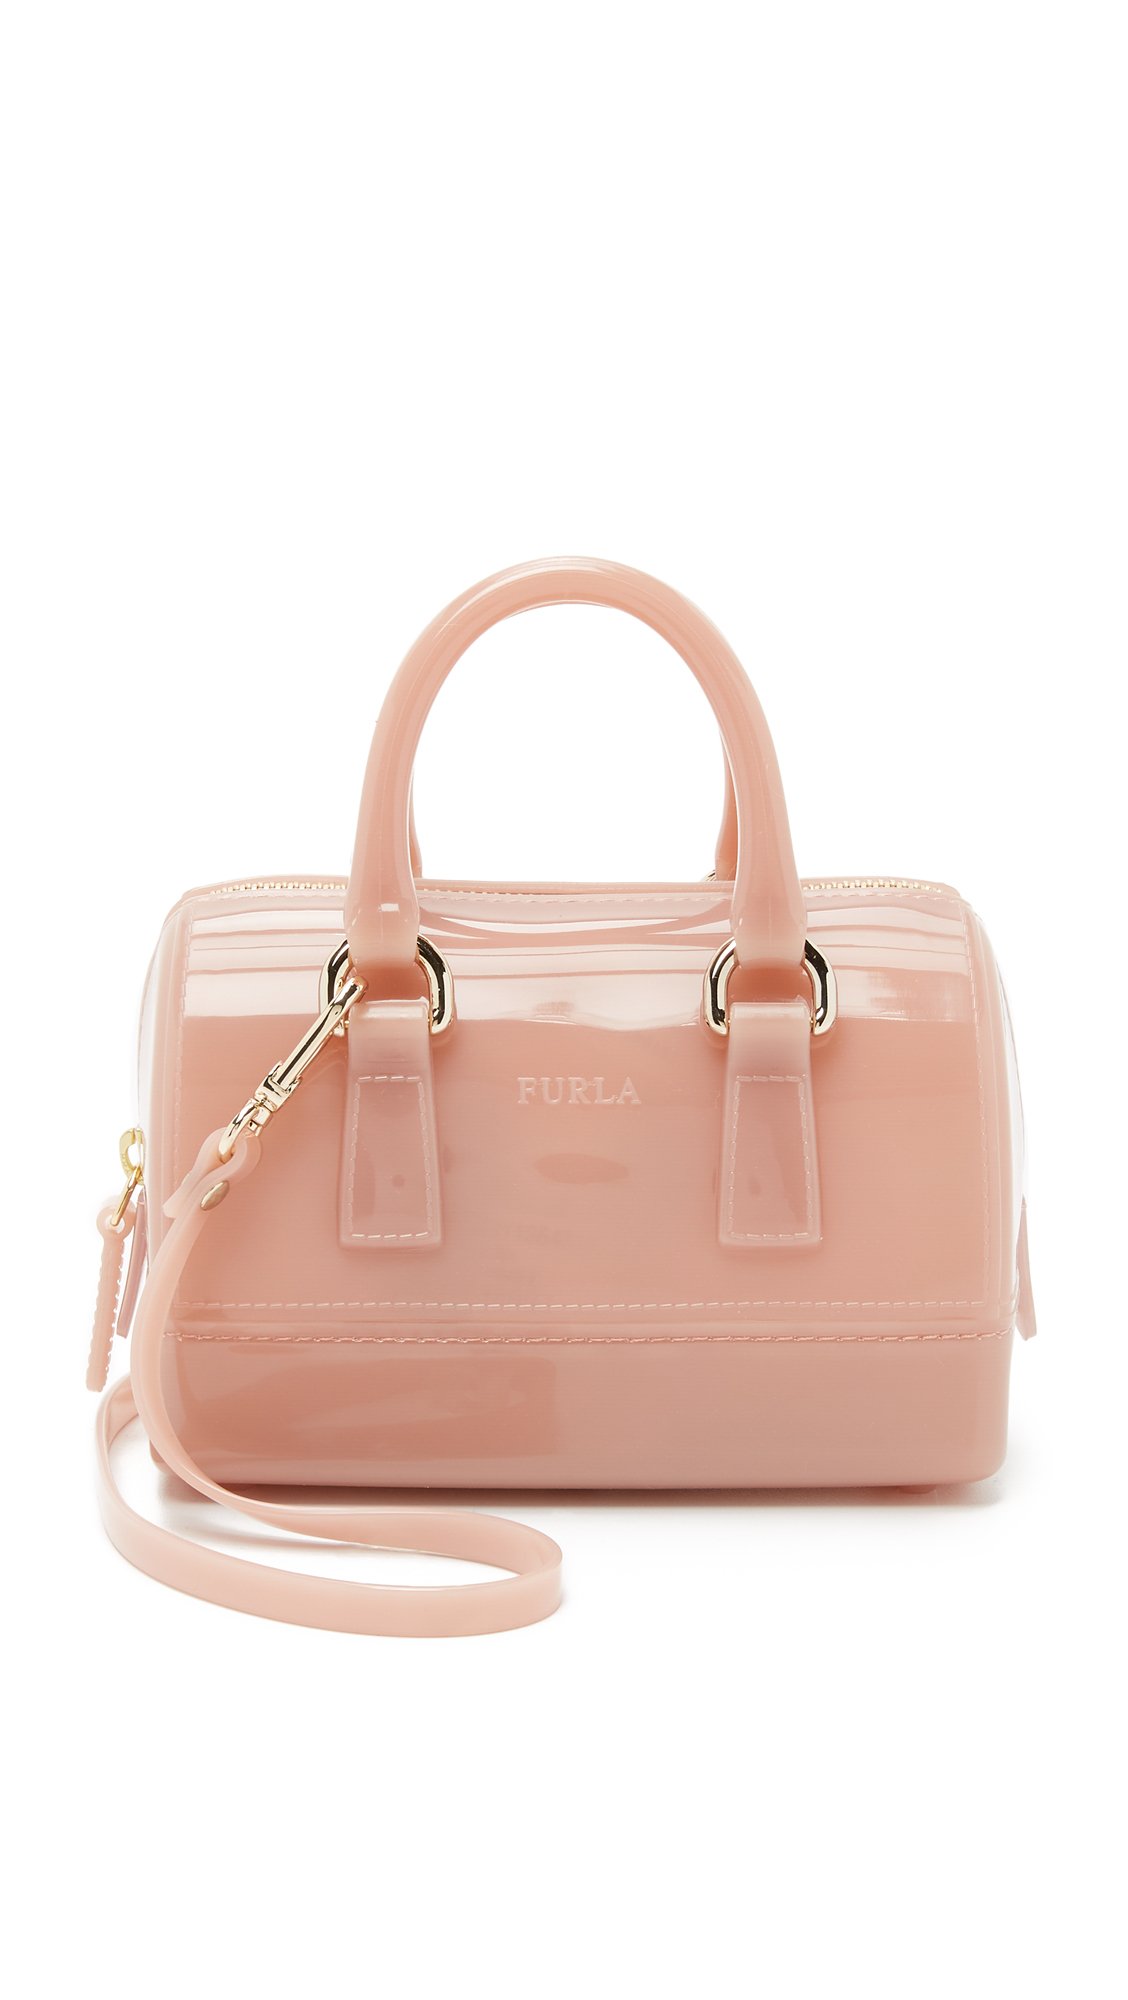 Furla Candy Sweetie Bag - Moonstone in Natural | Lyst